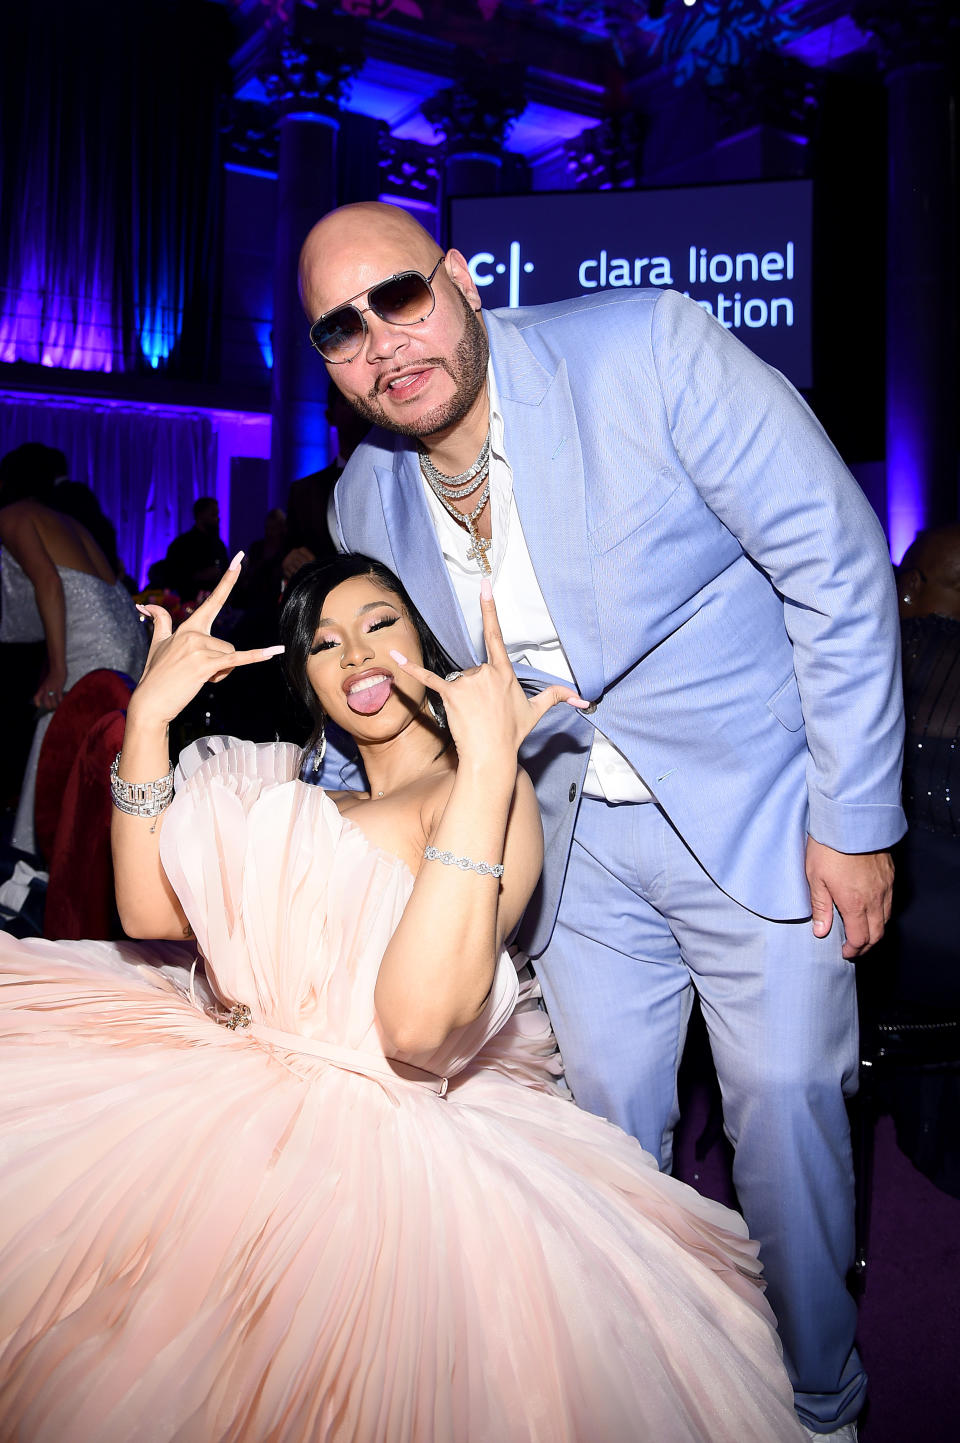 Cardi B and Fat Joe attend Rihanna’s 5th Annual Diamond Ball Benefitting The Clara Lionel Foundation at Cipriani Wall Street on September 12, 2019 in New York City. - Credit: Dimitrios Kambouris/Getty Images for Diamond Ball